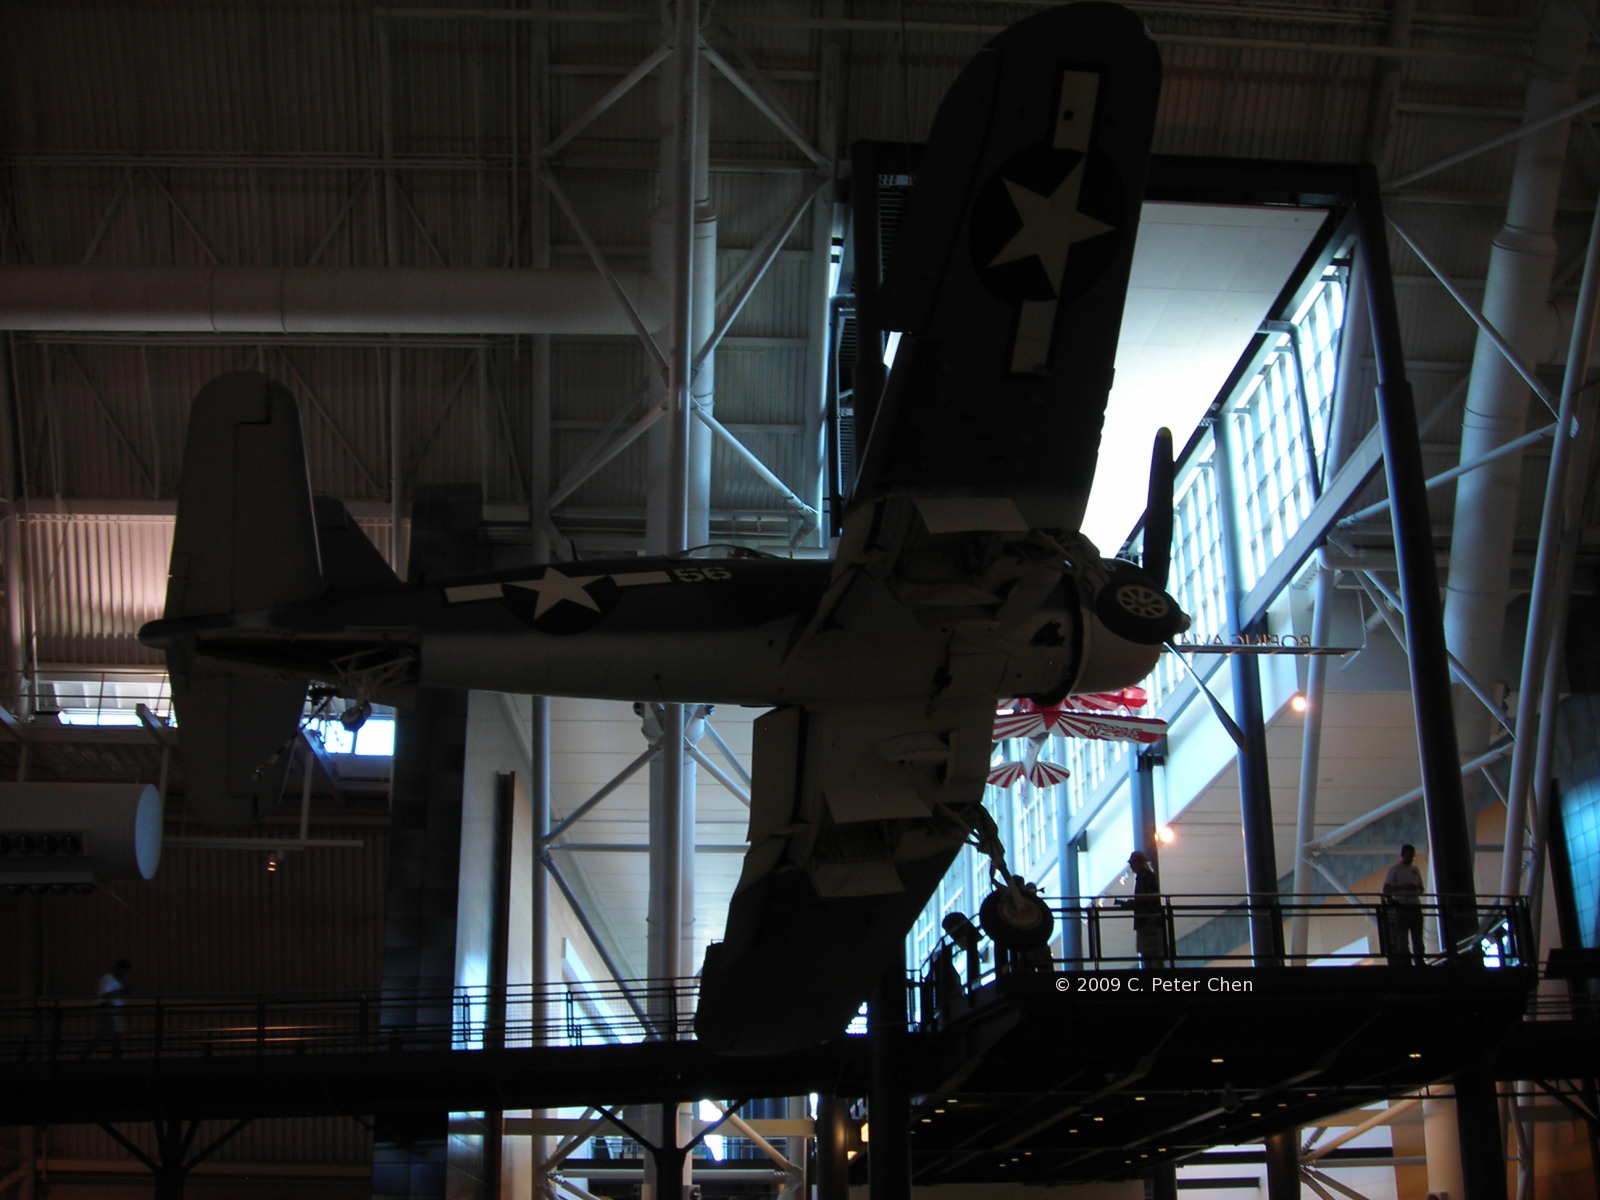 Underside of F4U Corsair fighter on display at the Smithsonian Air and Space Museum Udvar-Hazy Center, Chantilly, Virginia, United States, 26 Apr 2009